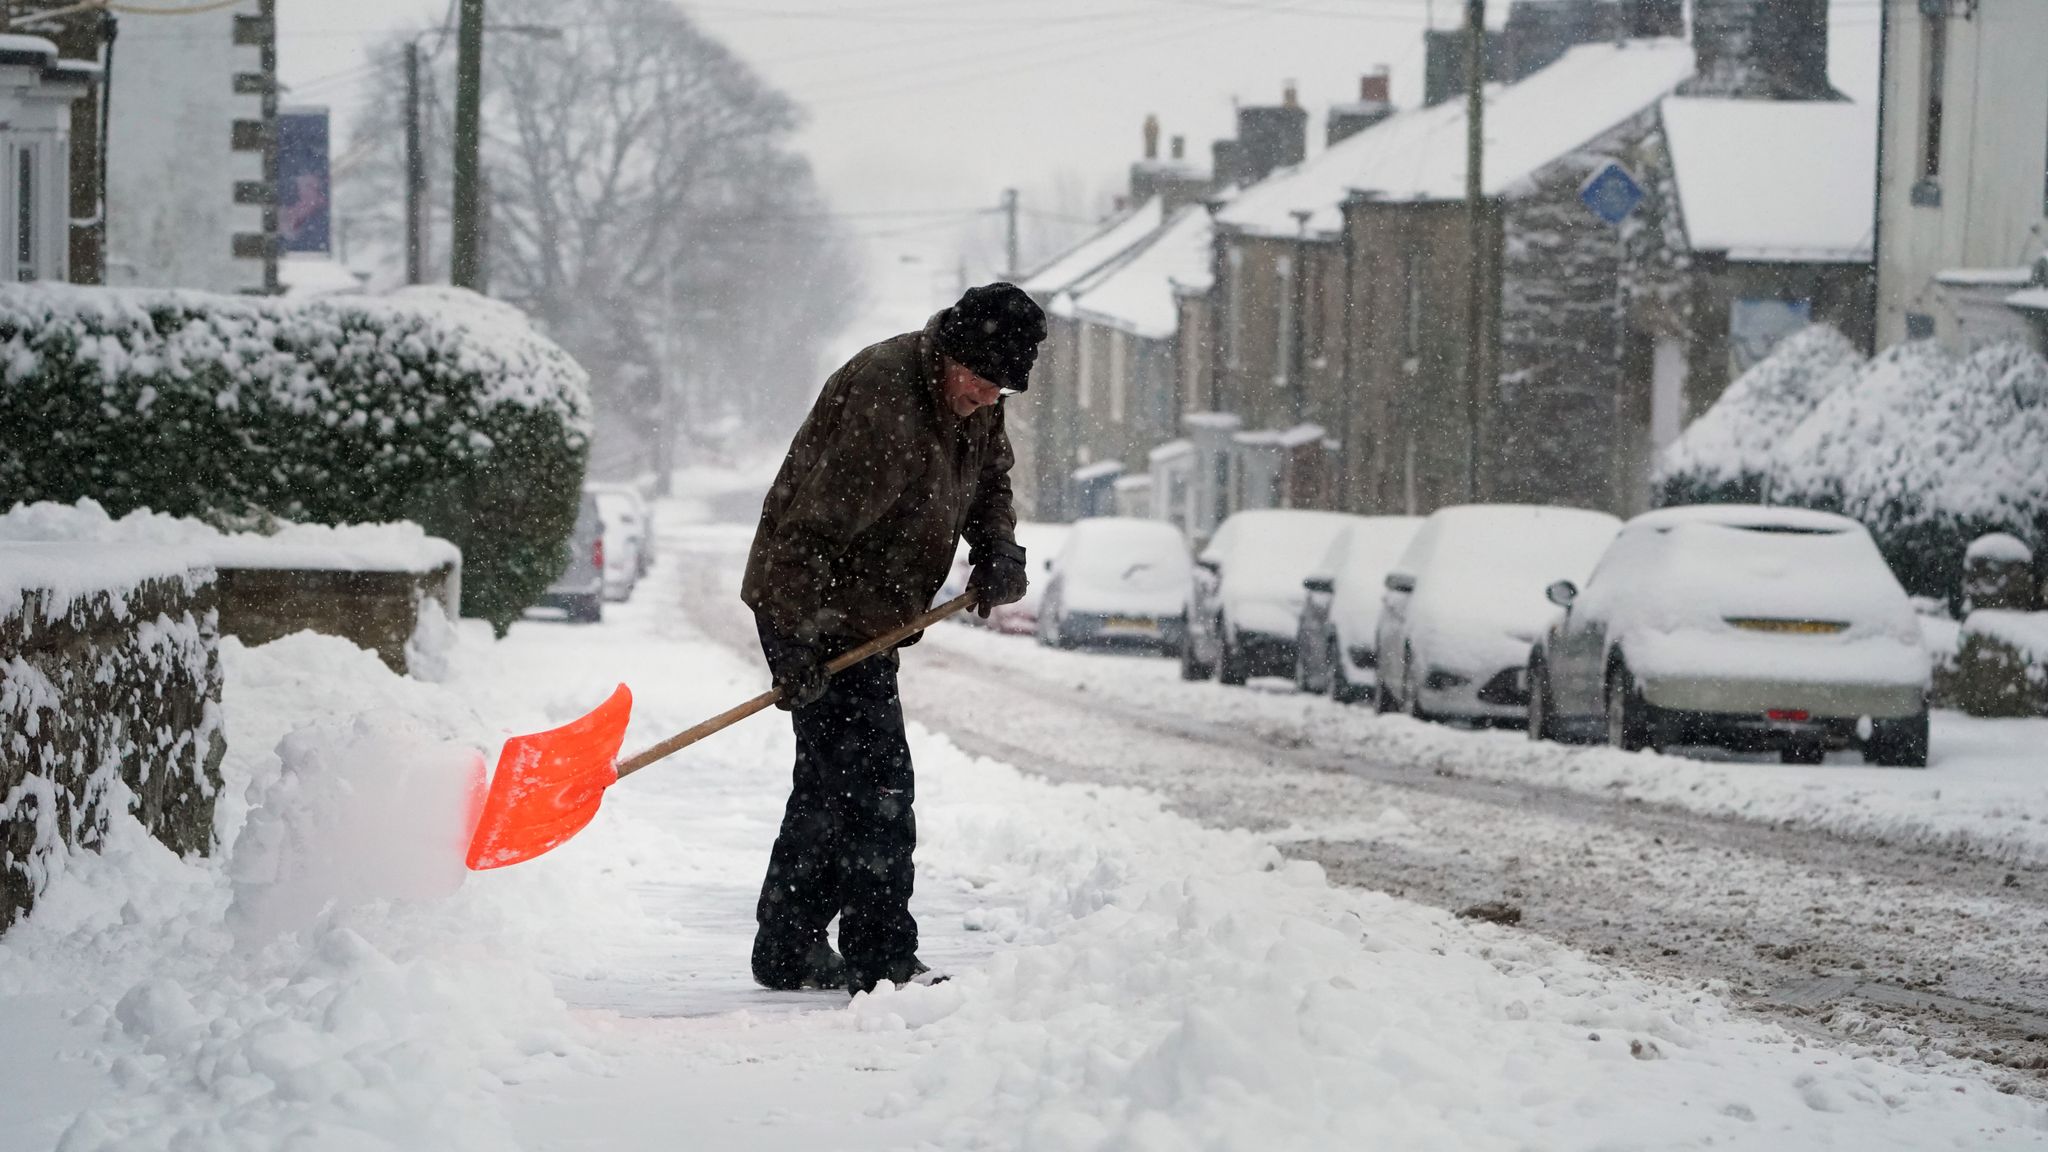 UK weather January 2021 was coldest in 10 years with more wintry